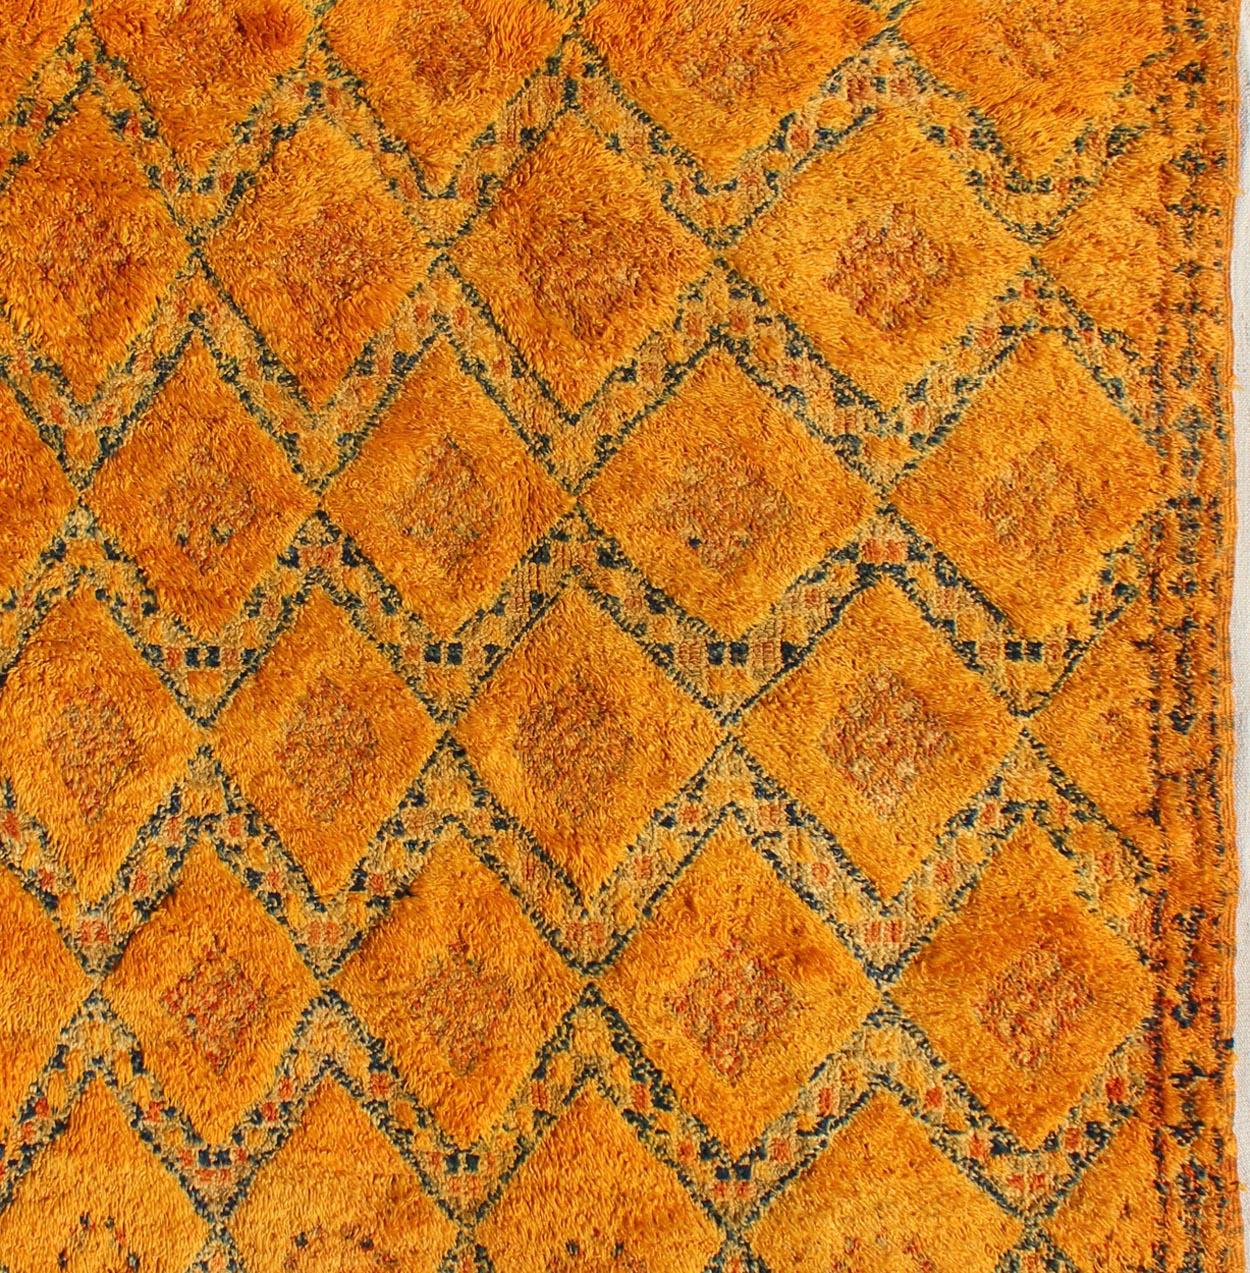 Saffron color antique Moroccan carpet with geometric patterns with charcoal and ivory, Keivan Woven Arts / rug LCB-18-145, country of origin / type: Morocco / Tribal, circa 1920.

Crafted in the early 20th century, this gorgeous Antique Moroccan